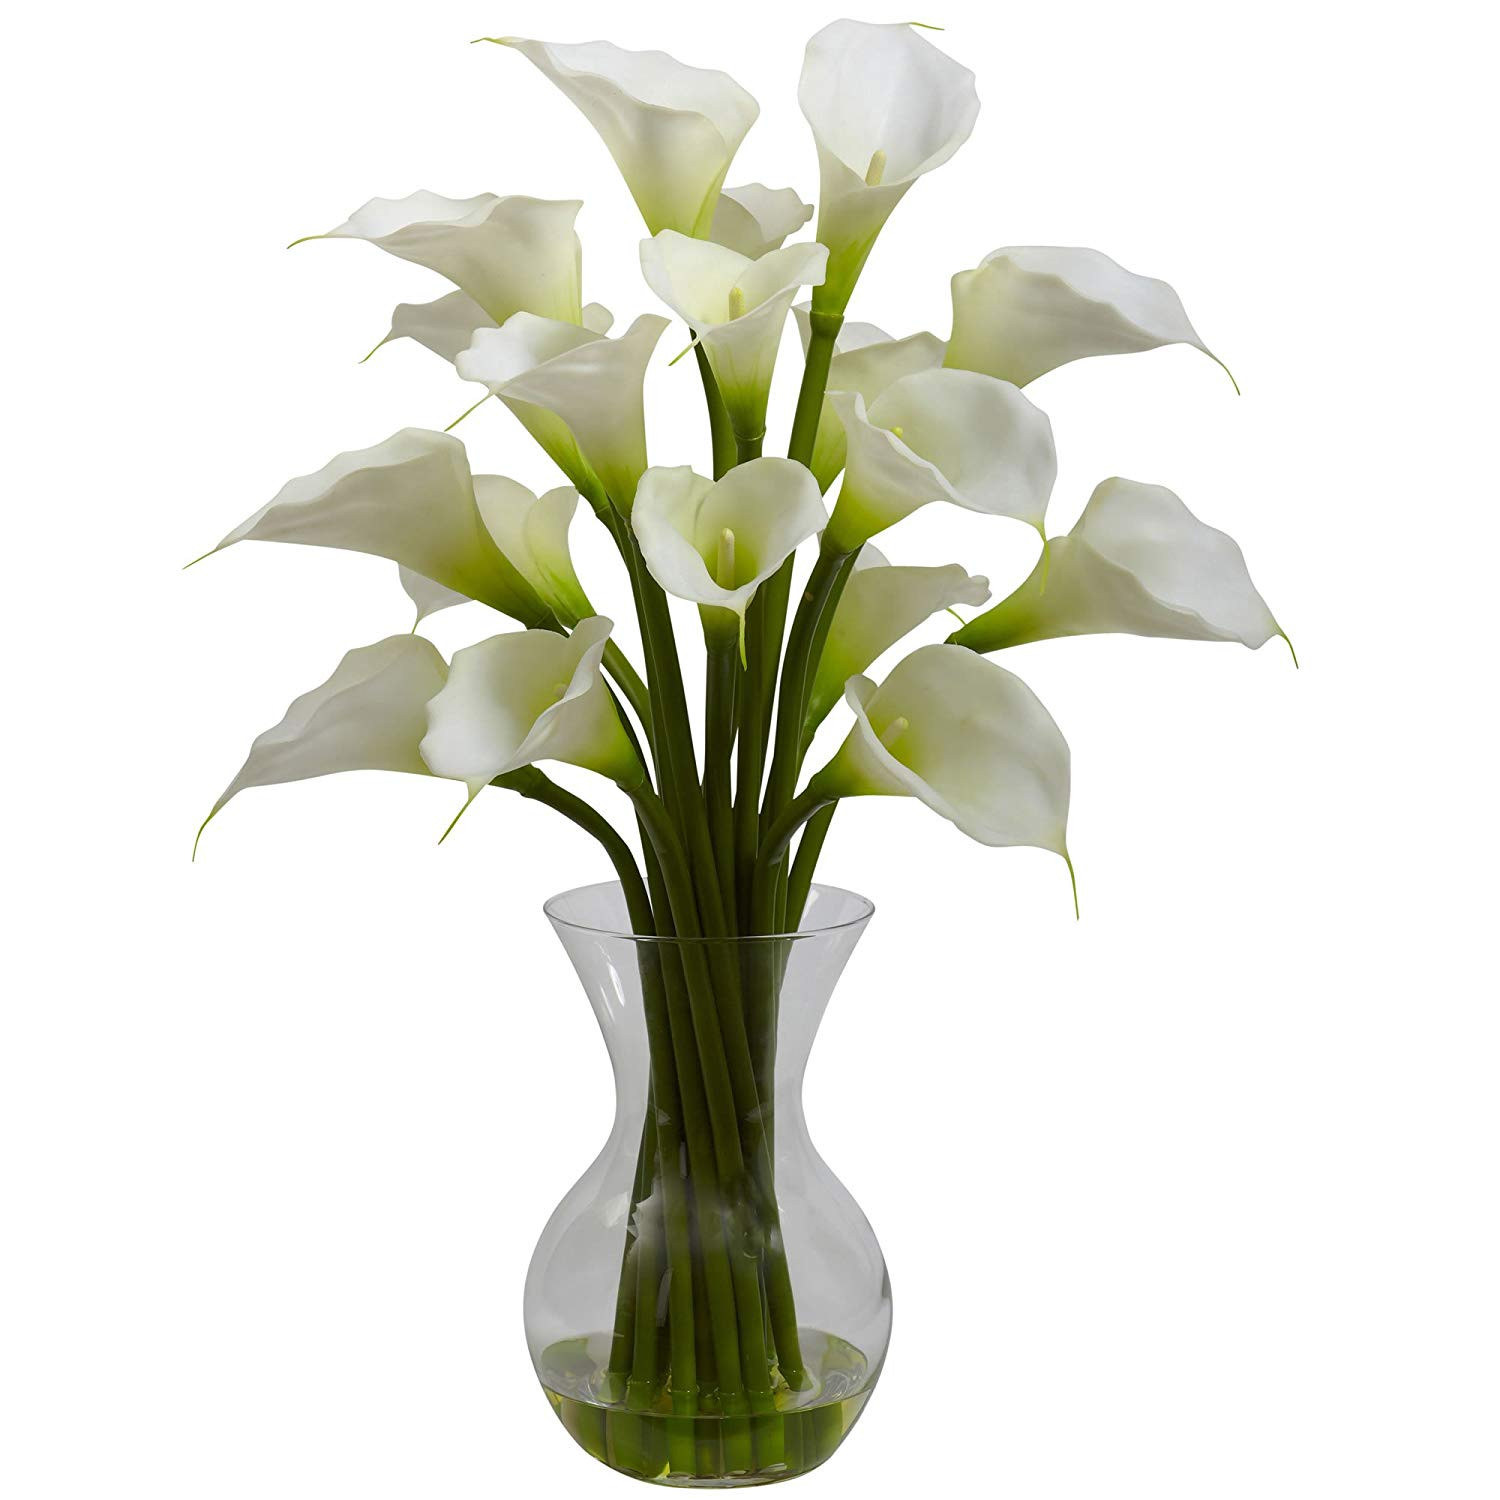 30 attractive White Flower Vases for Sale 2022 free download white flower vases for sale of amazon com nearly natural 1299 cr galla calla lily with vase throughout amazon com nearly natural 1299 cr galla calla lily with vase arrangement cream home kit